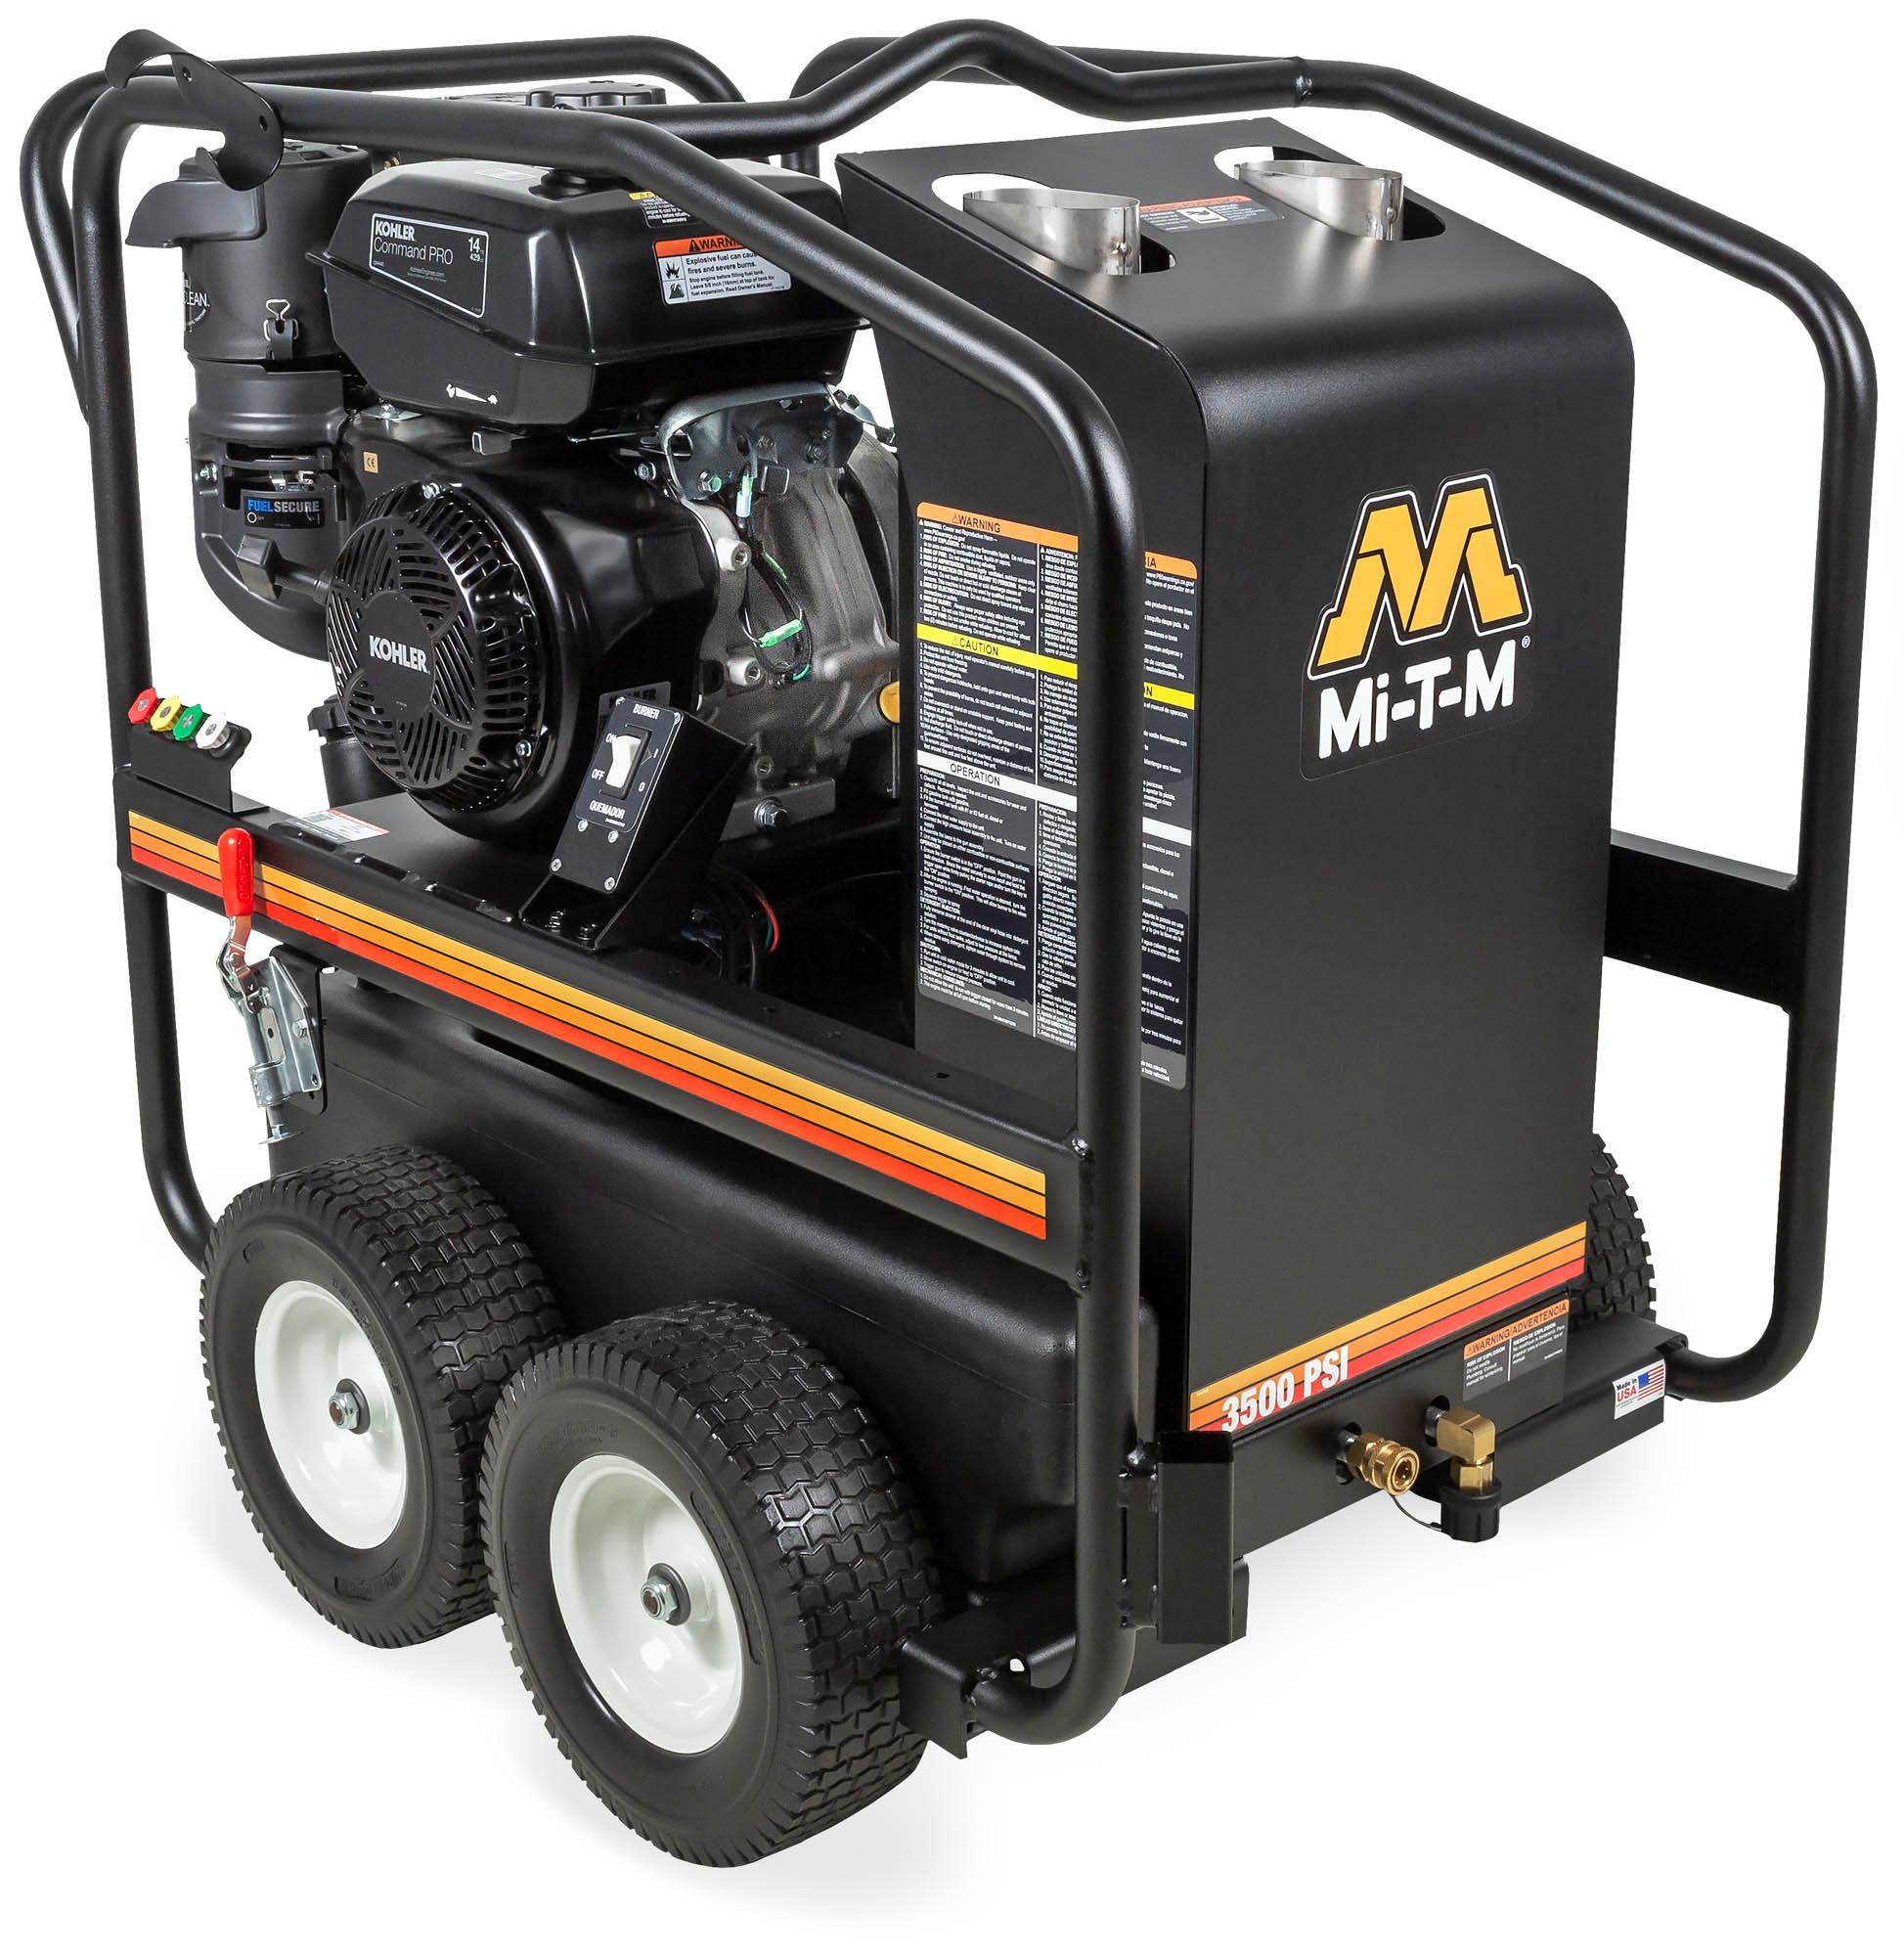 3500 PSI @ 3.3 GPM Direct Drive Kohler CH440 Gas Hot Water Pressure Washer w/ AR Pump (HSP)